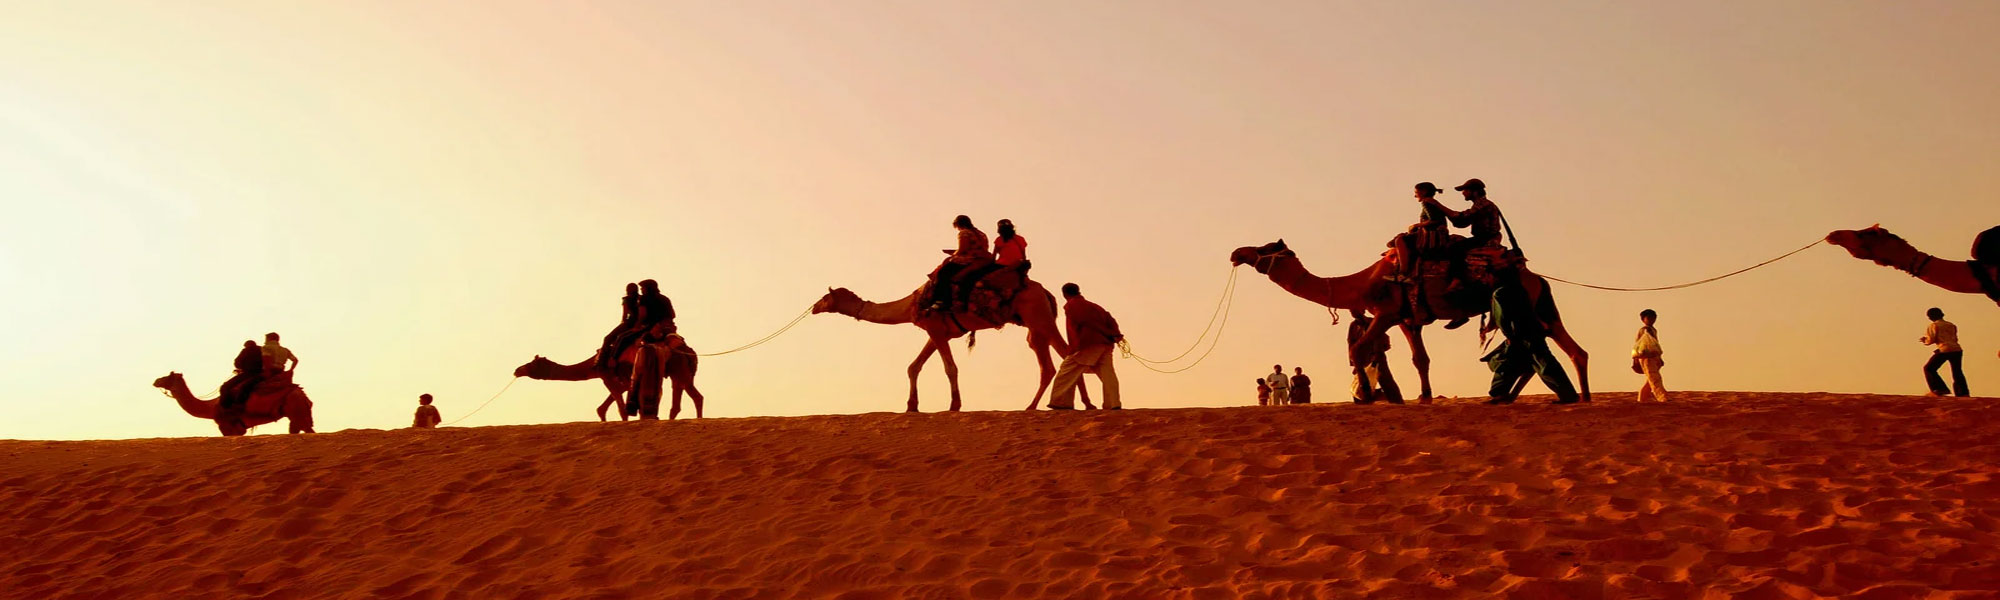 Himpushp Tours in India with Camel Safari Tours in India